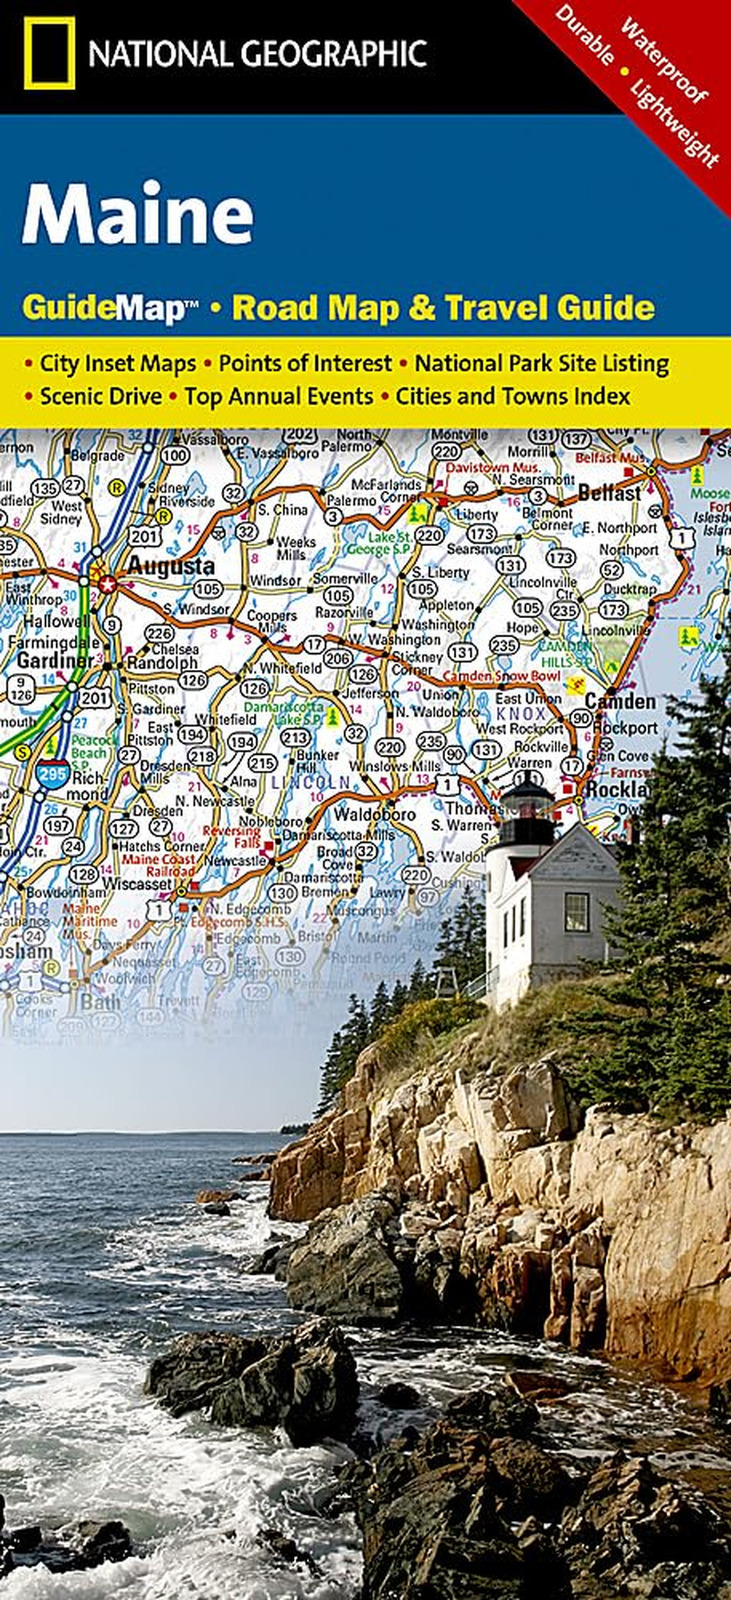 Maine Map (National Geographic Guide Map) - NEW